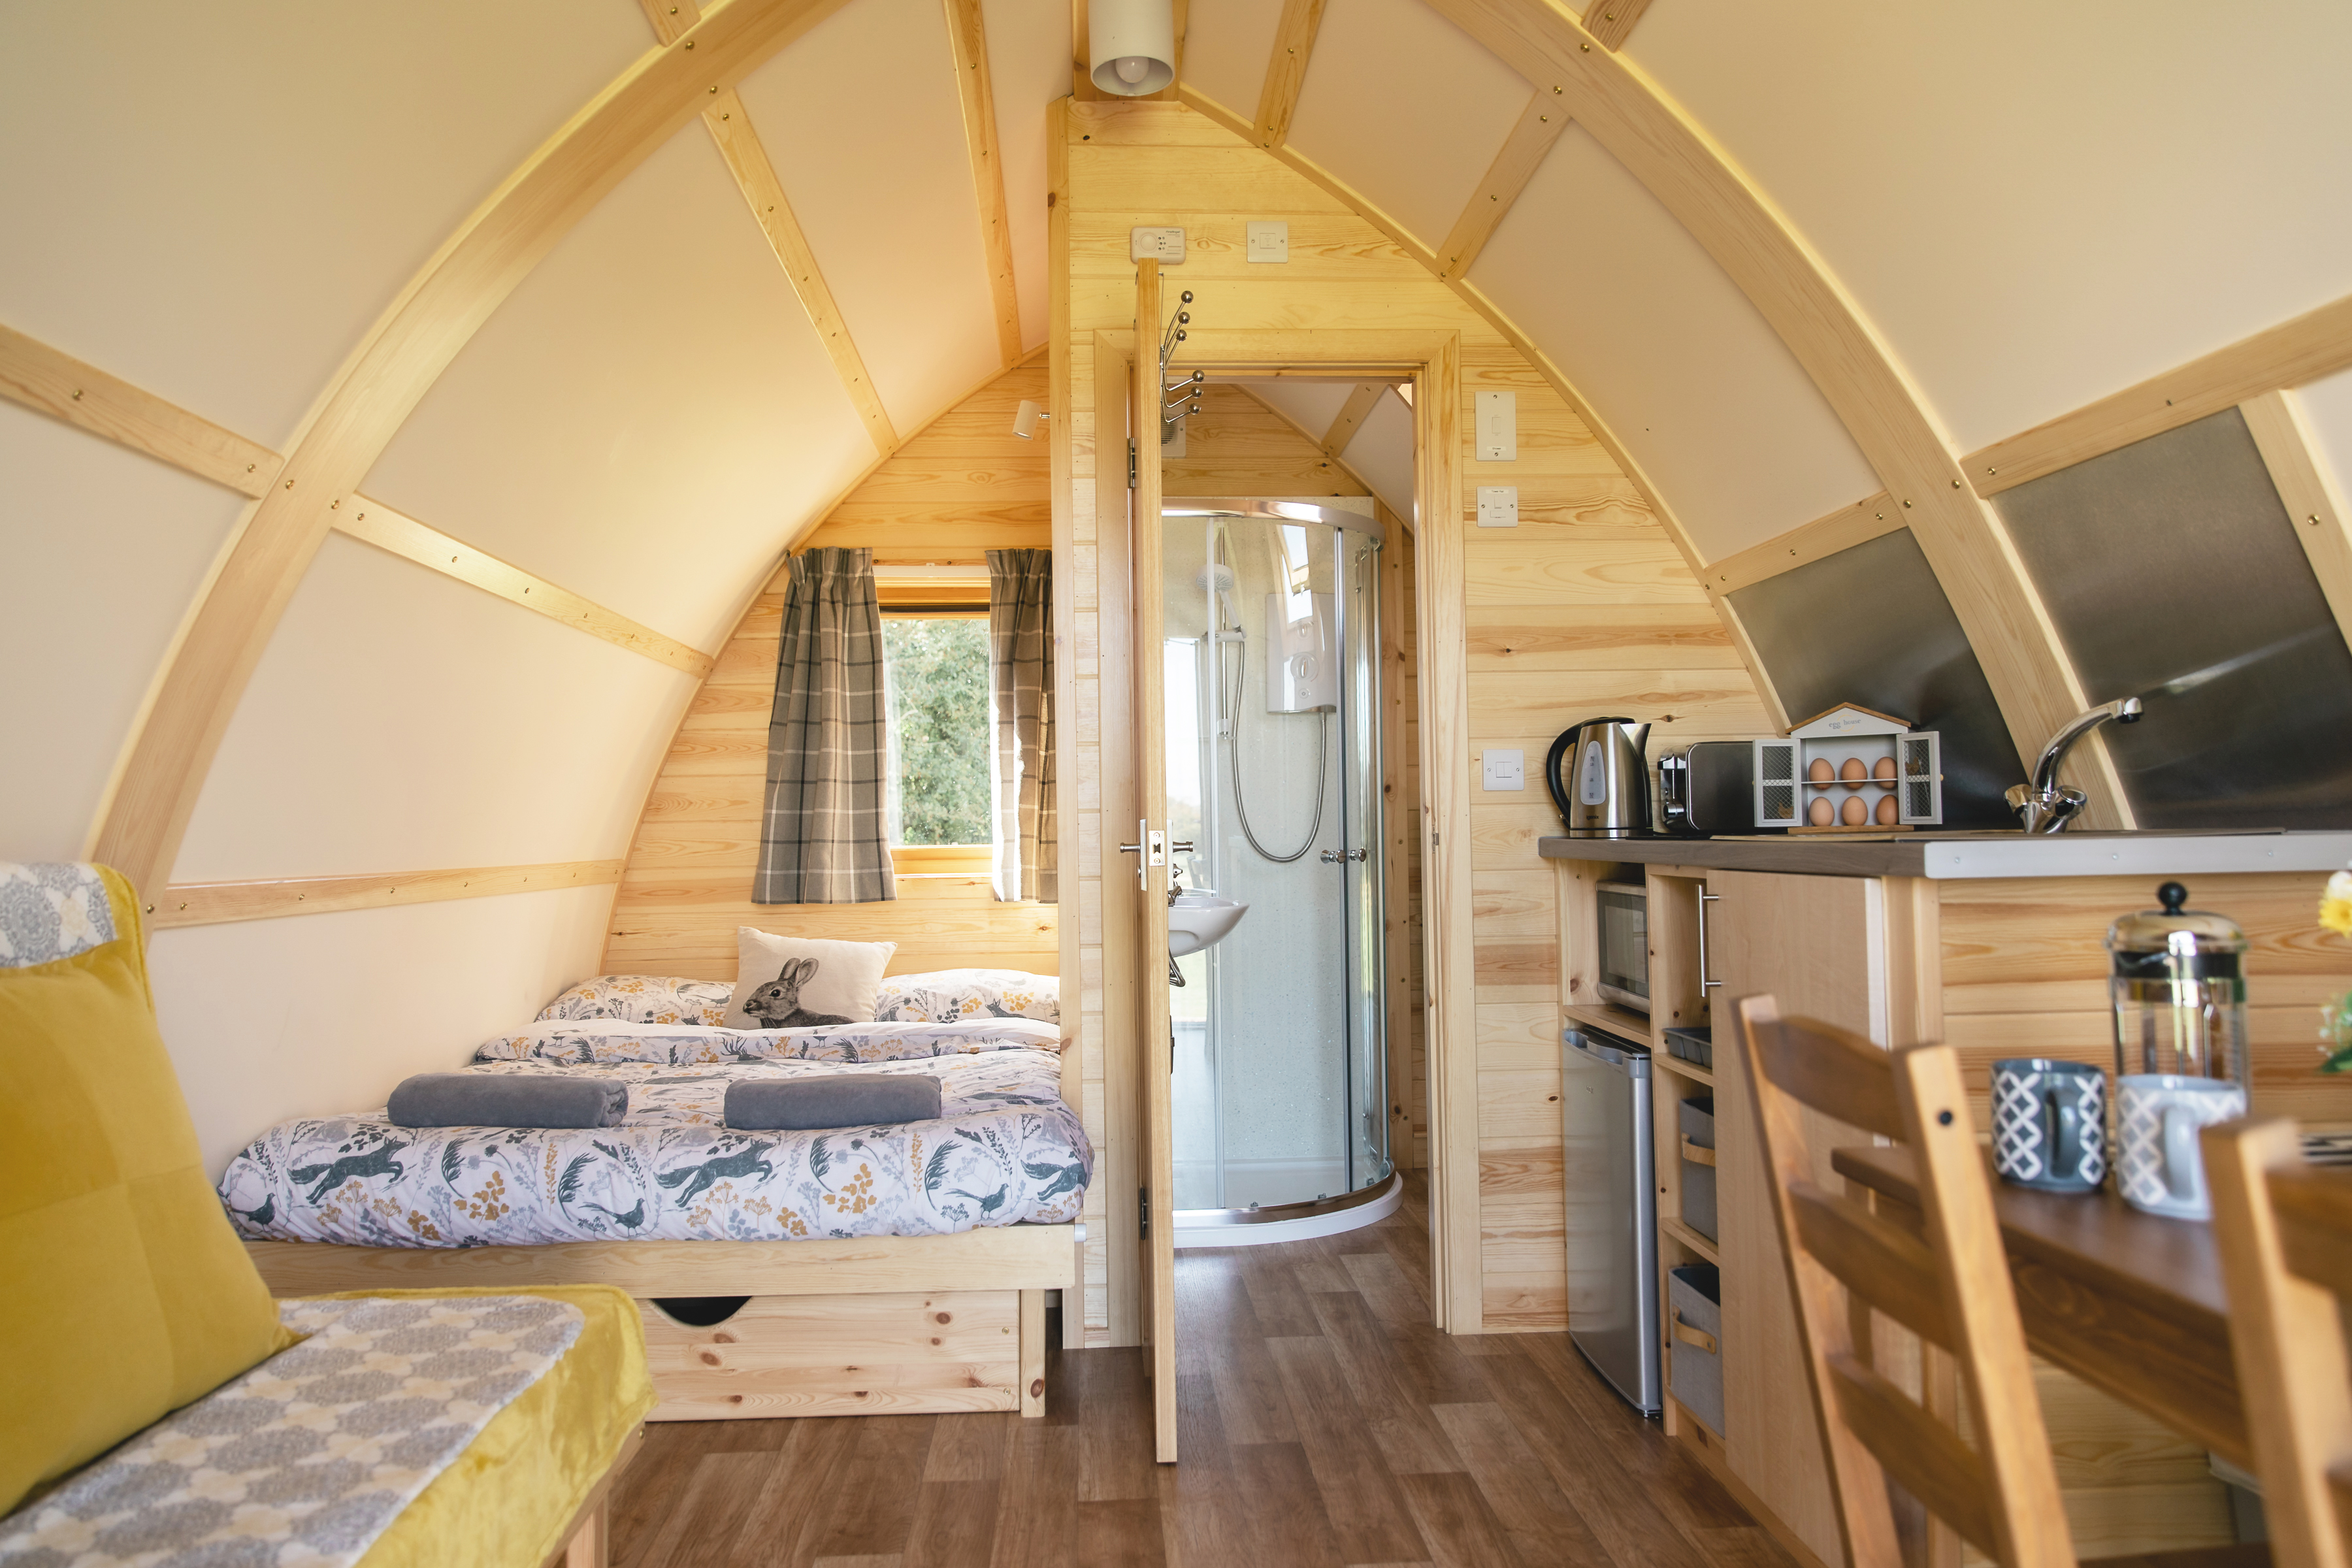 Inside of a running water deluxe cabin